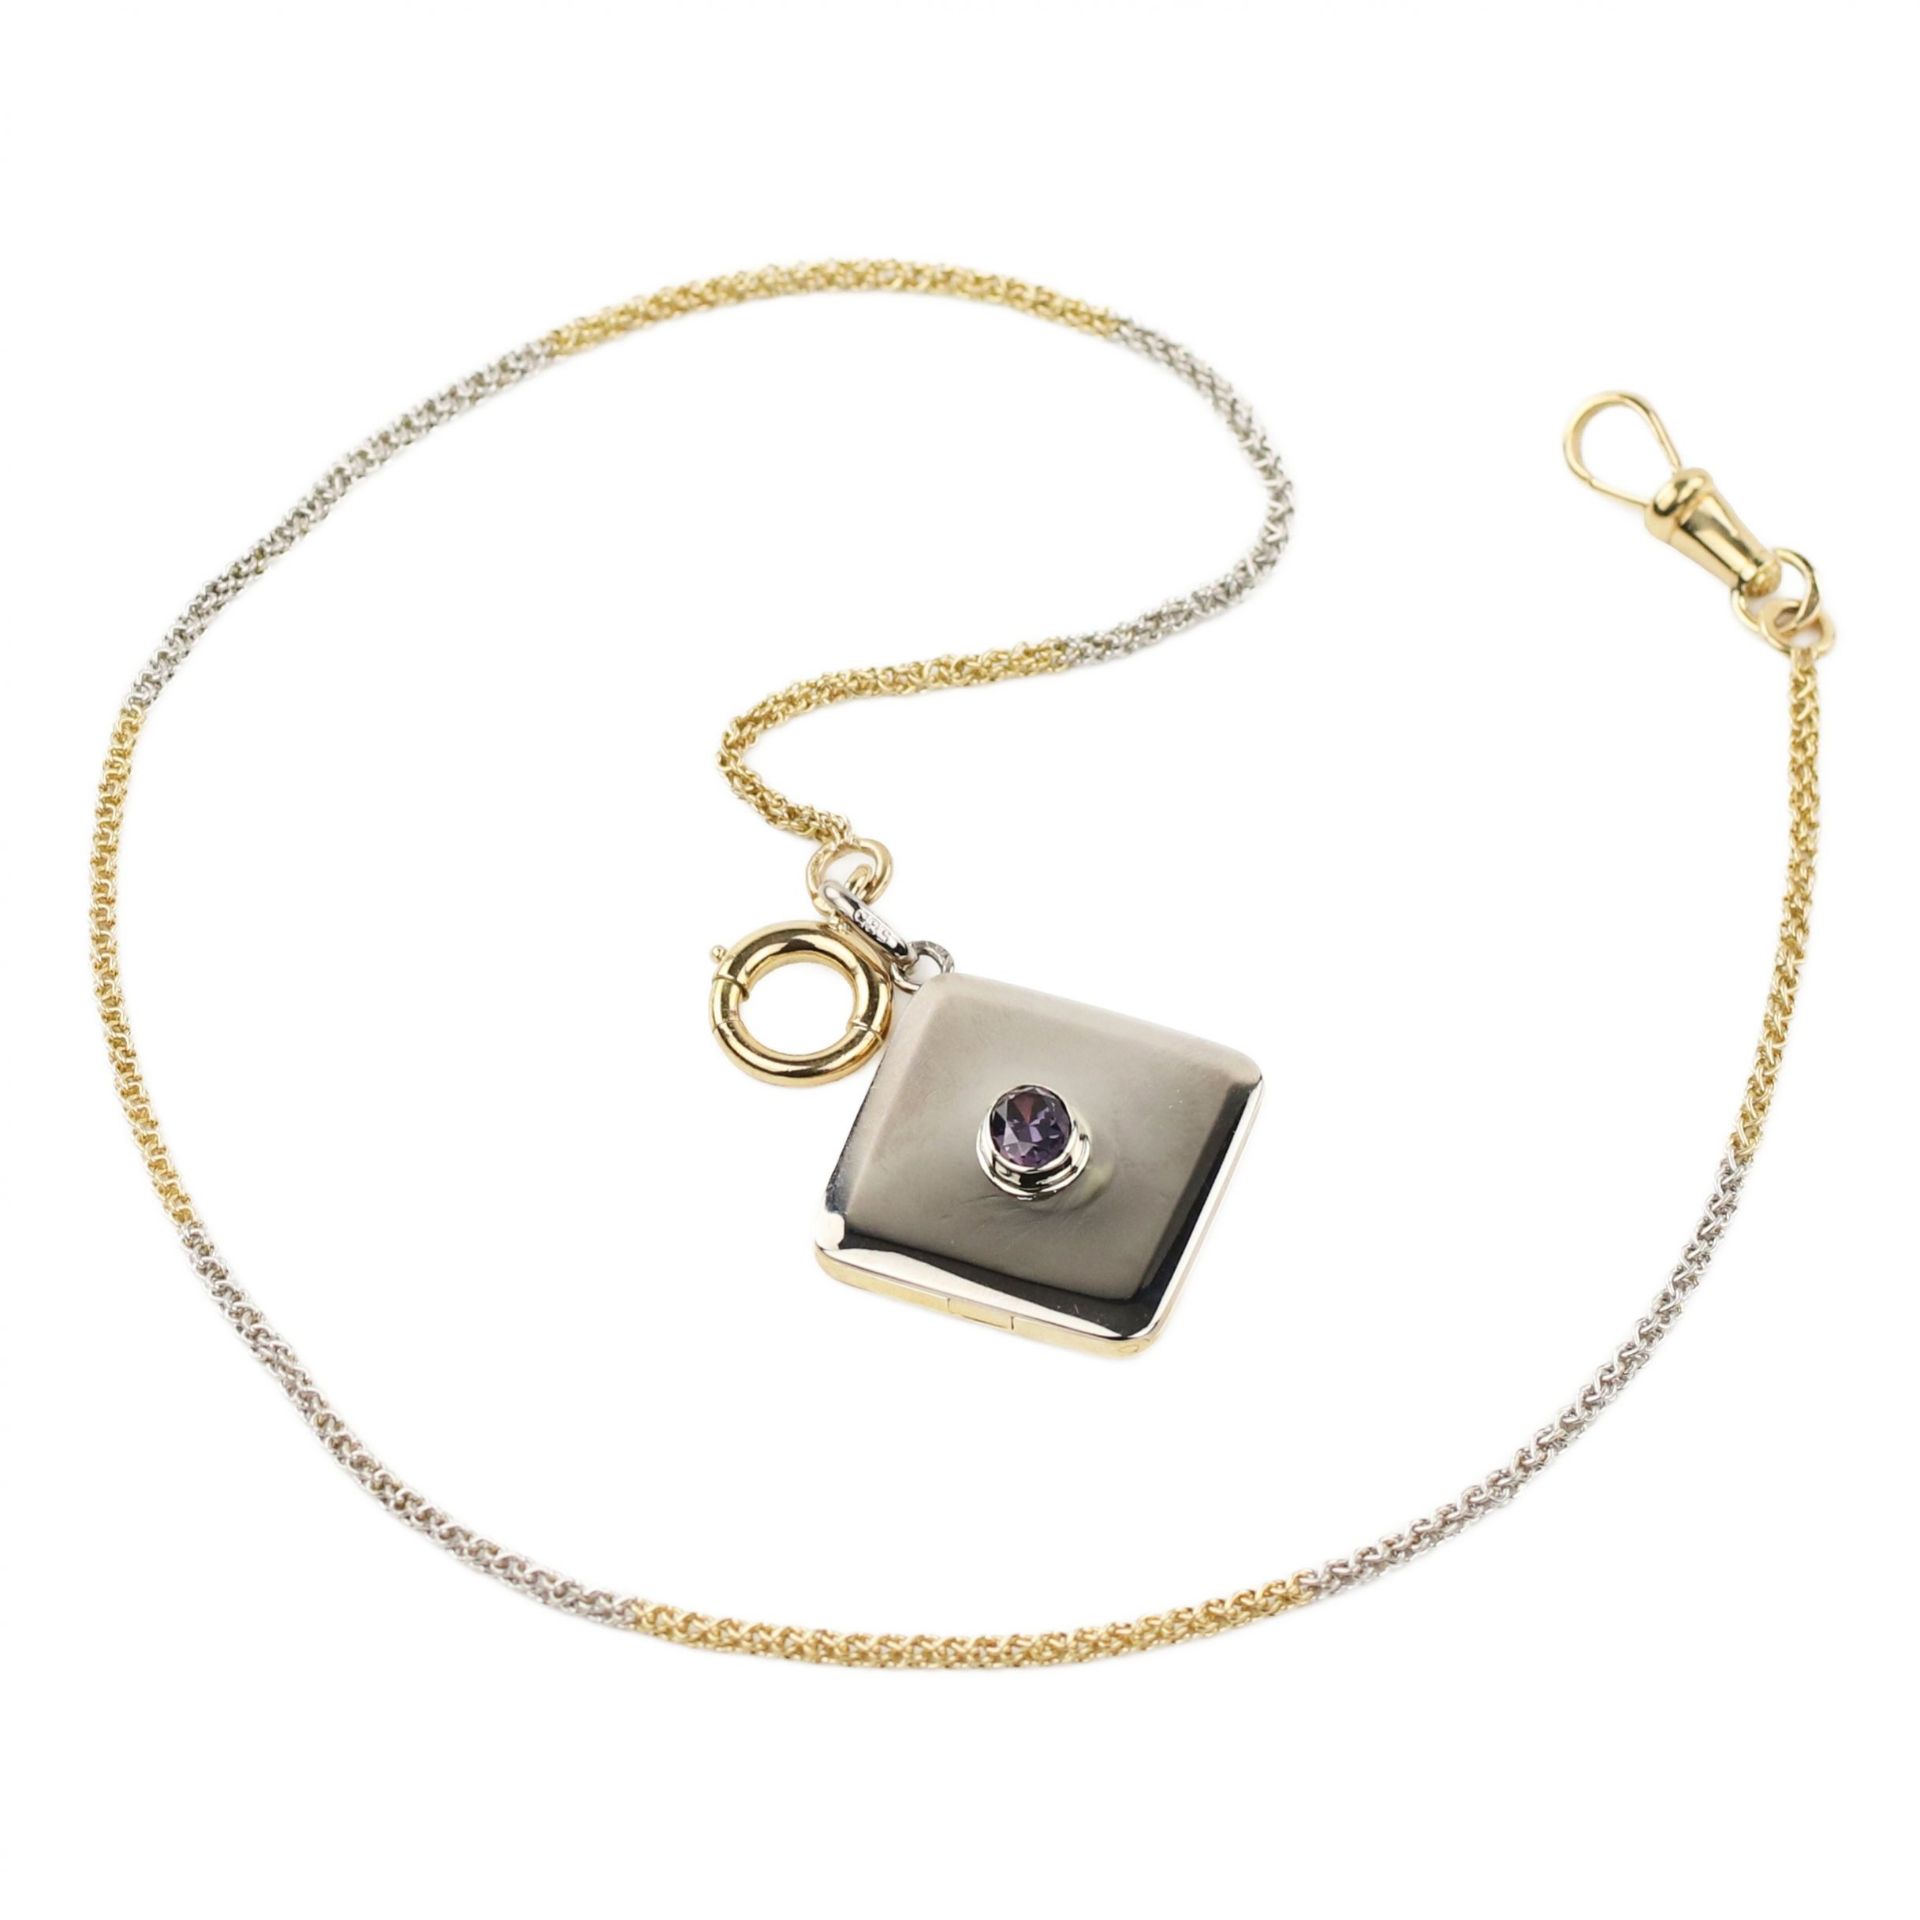 Russian gold chain for pocket watches with a diamond-shaped pendant. The turn of the 19th-20th centu